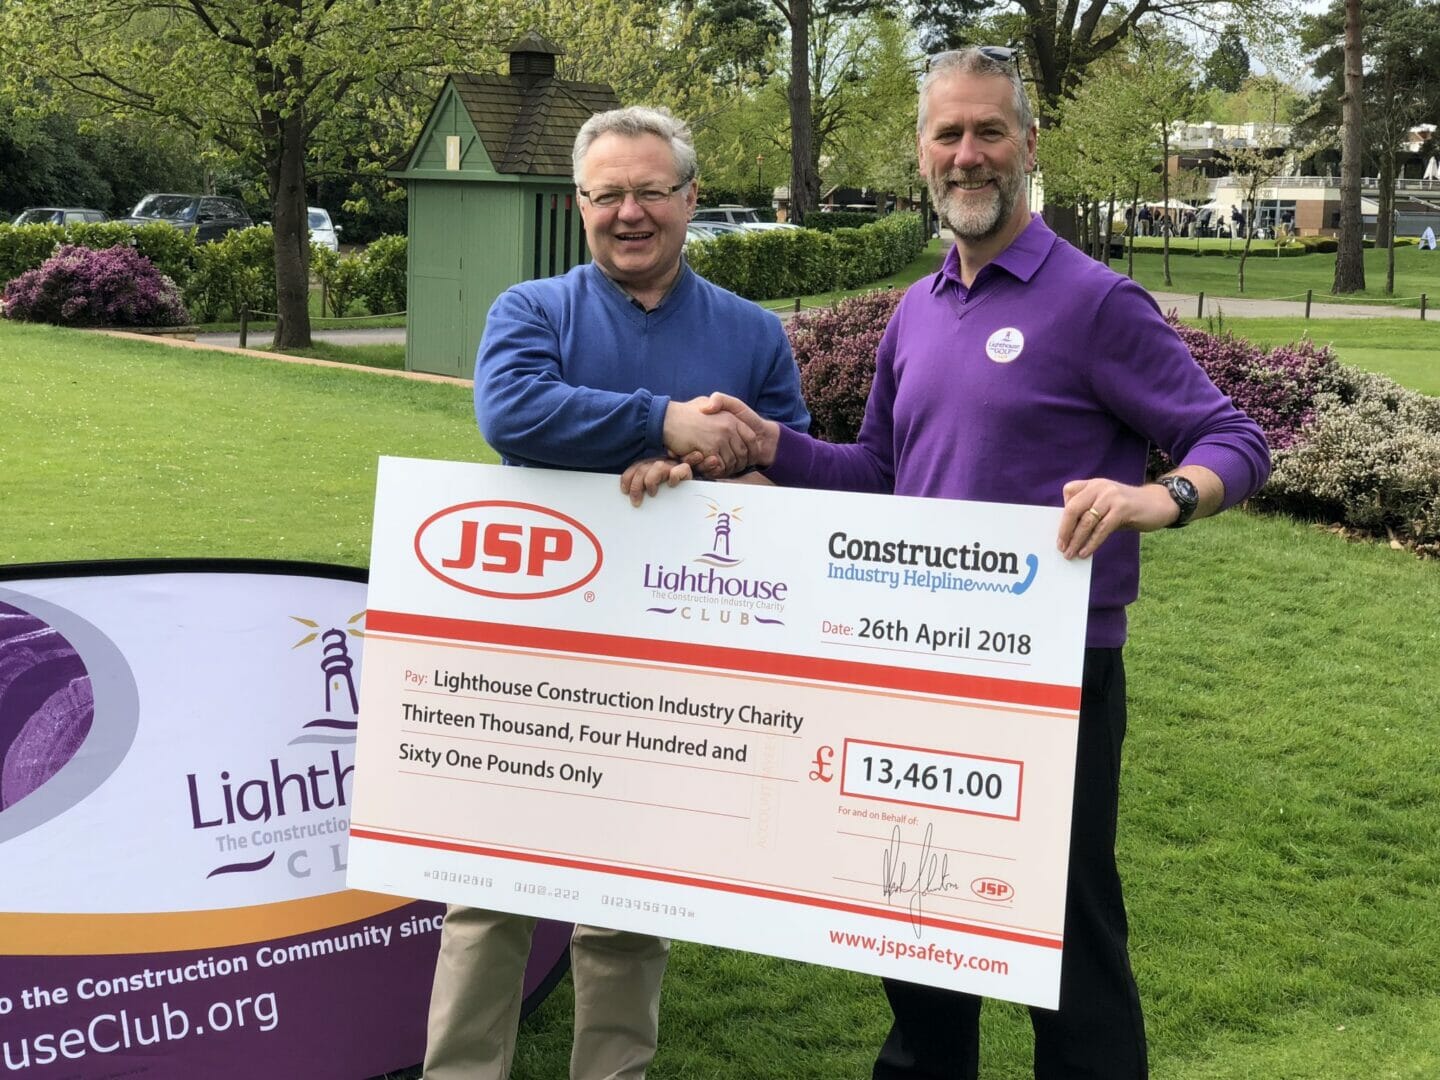 JSP hands over large donation to the Lighthouse Club to support the Construction Industry Helpline @JSPLtd